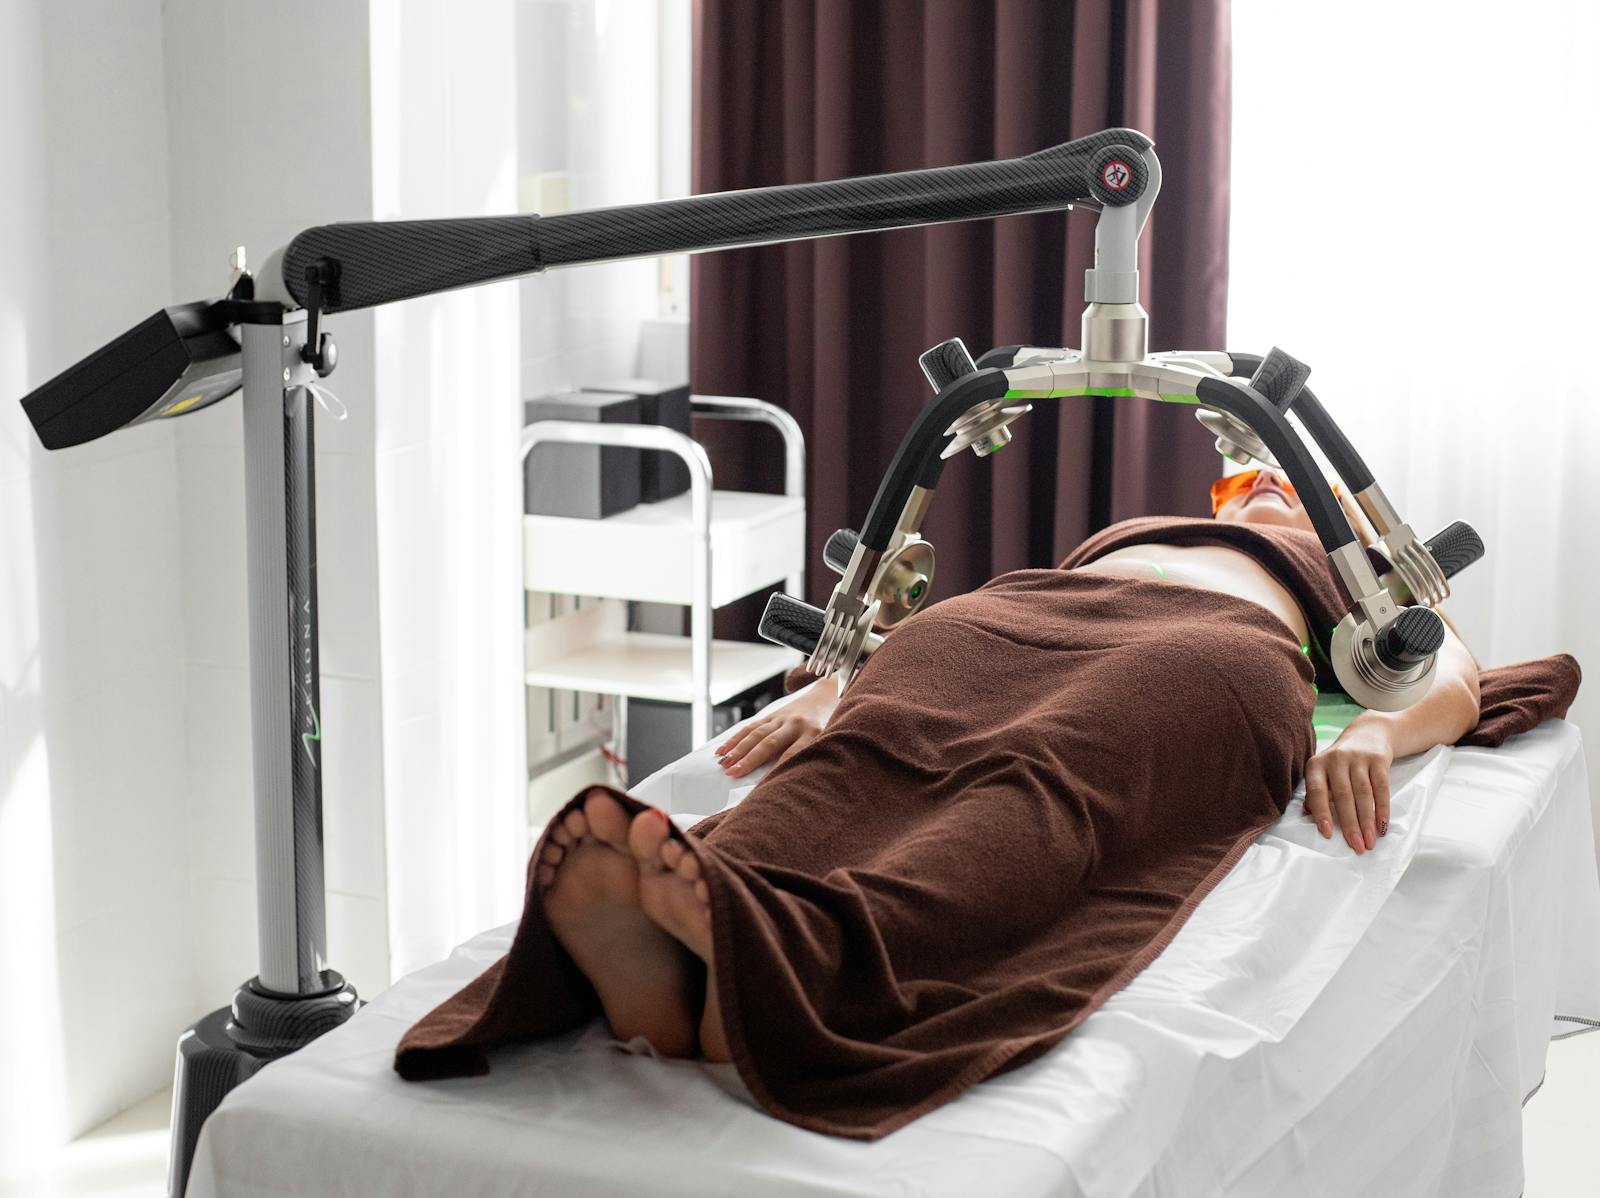 Unrecognizable female under laser weight loss machine on medical table